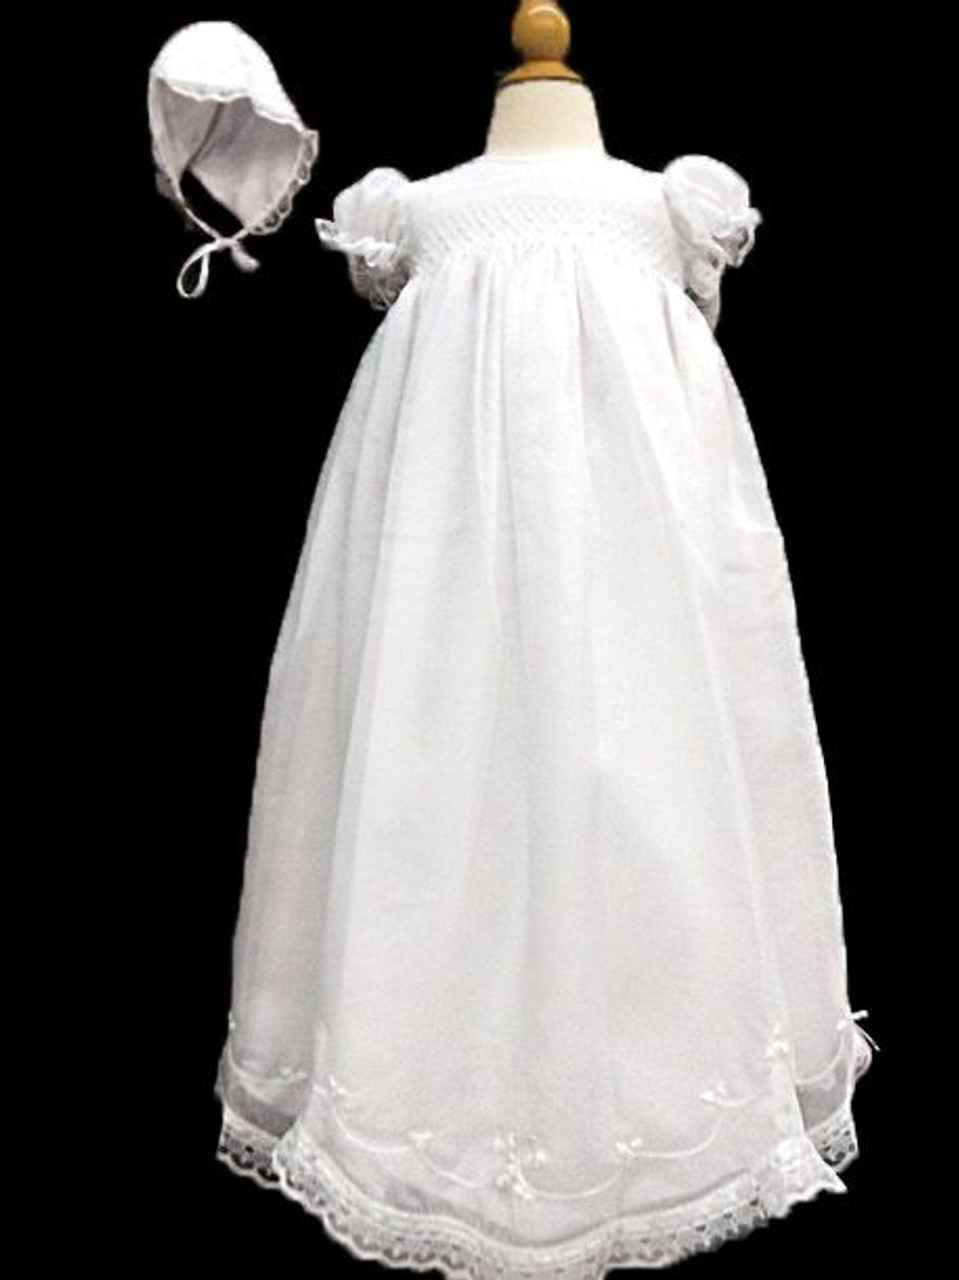 Crochet Lace Christening Gown with Blush Lining – Sara's Children's Boutique